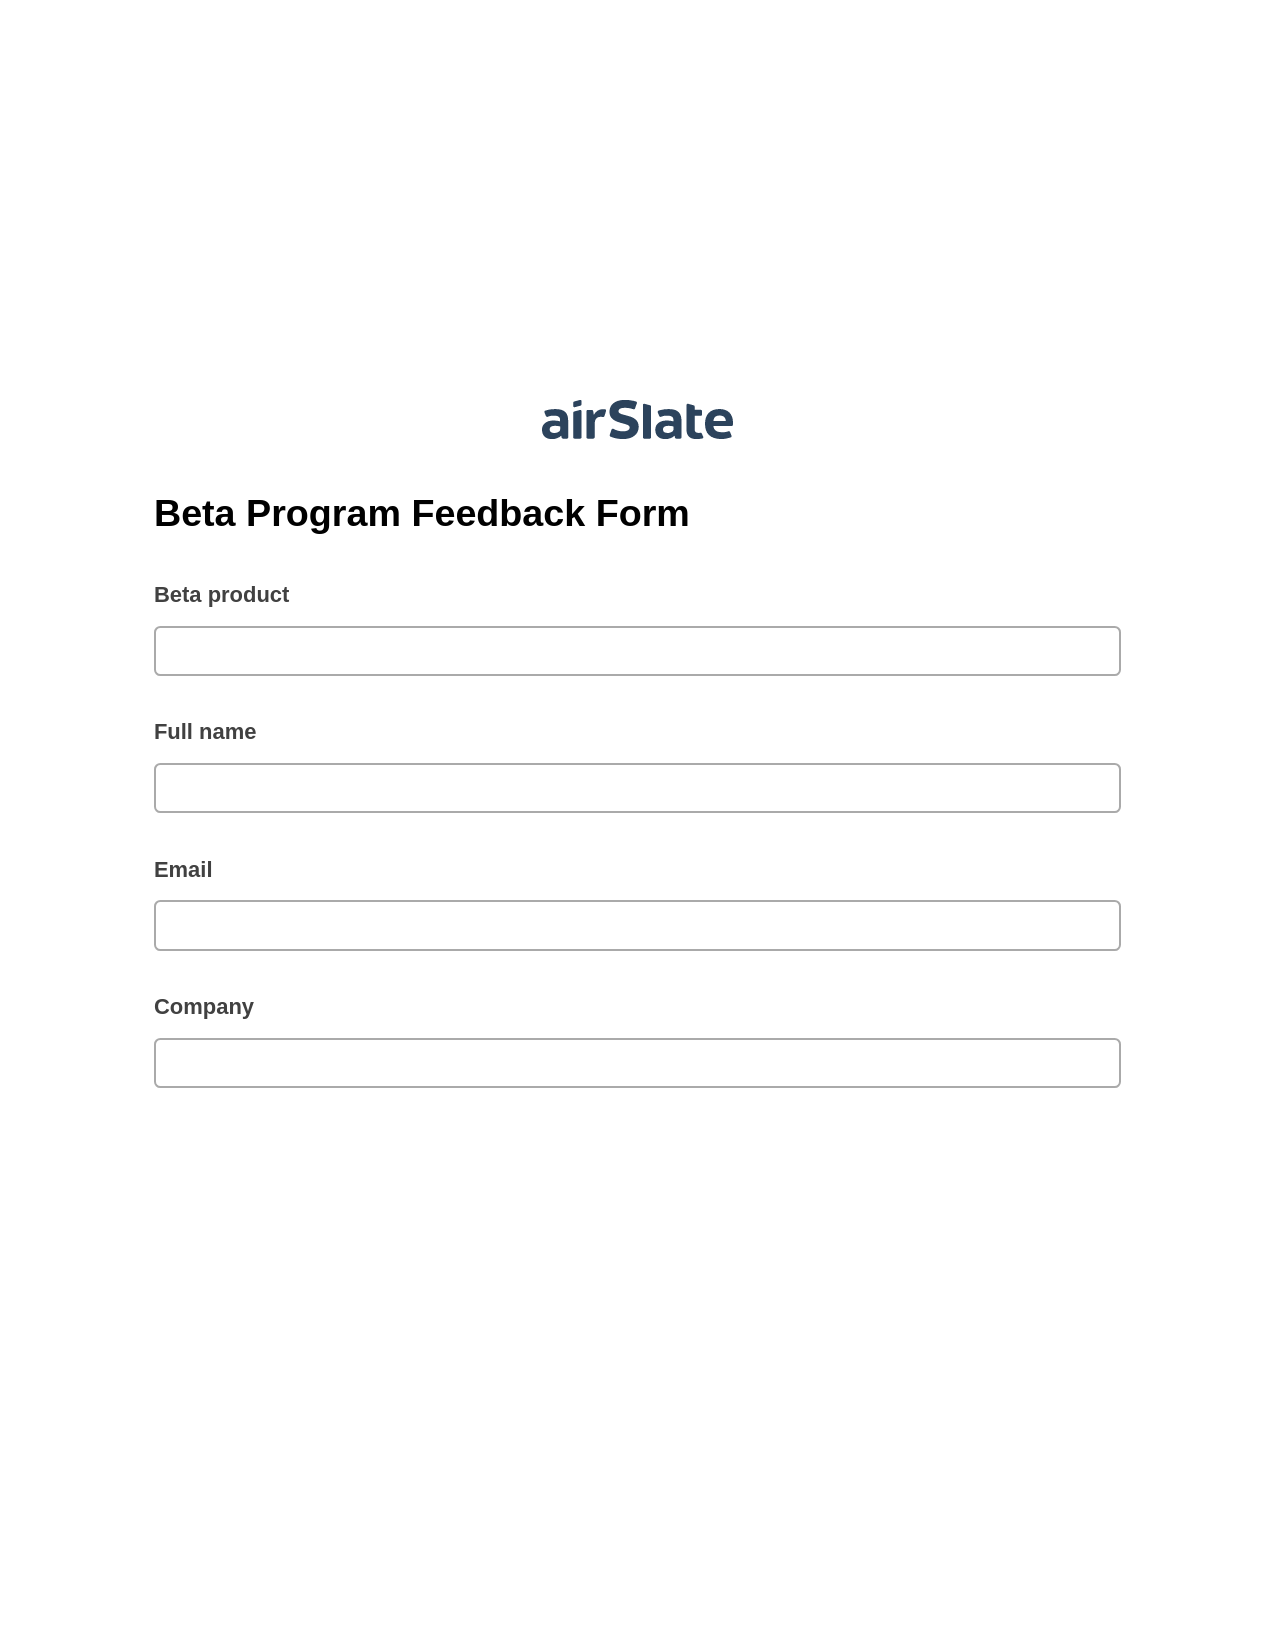 Multirole Beta Program Feedback Form Pre-fill Document Bot, Send a Slate with Roles Bot, Text Message Notification Postfinish Bot